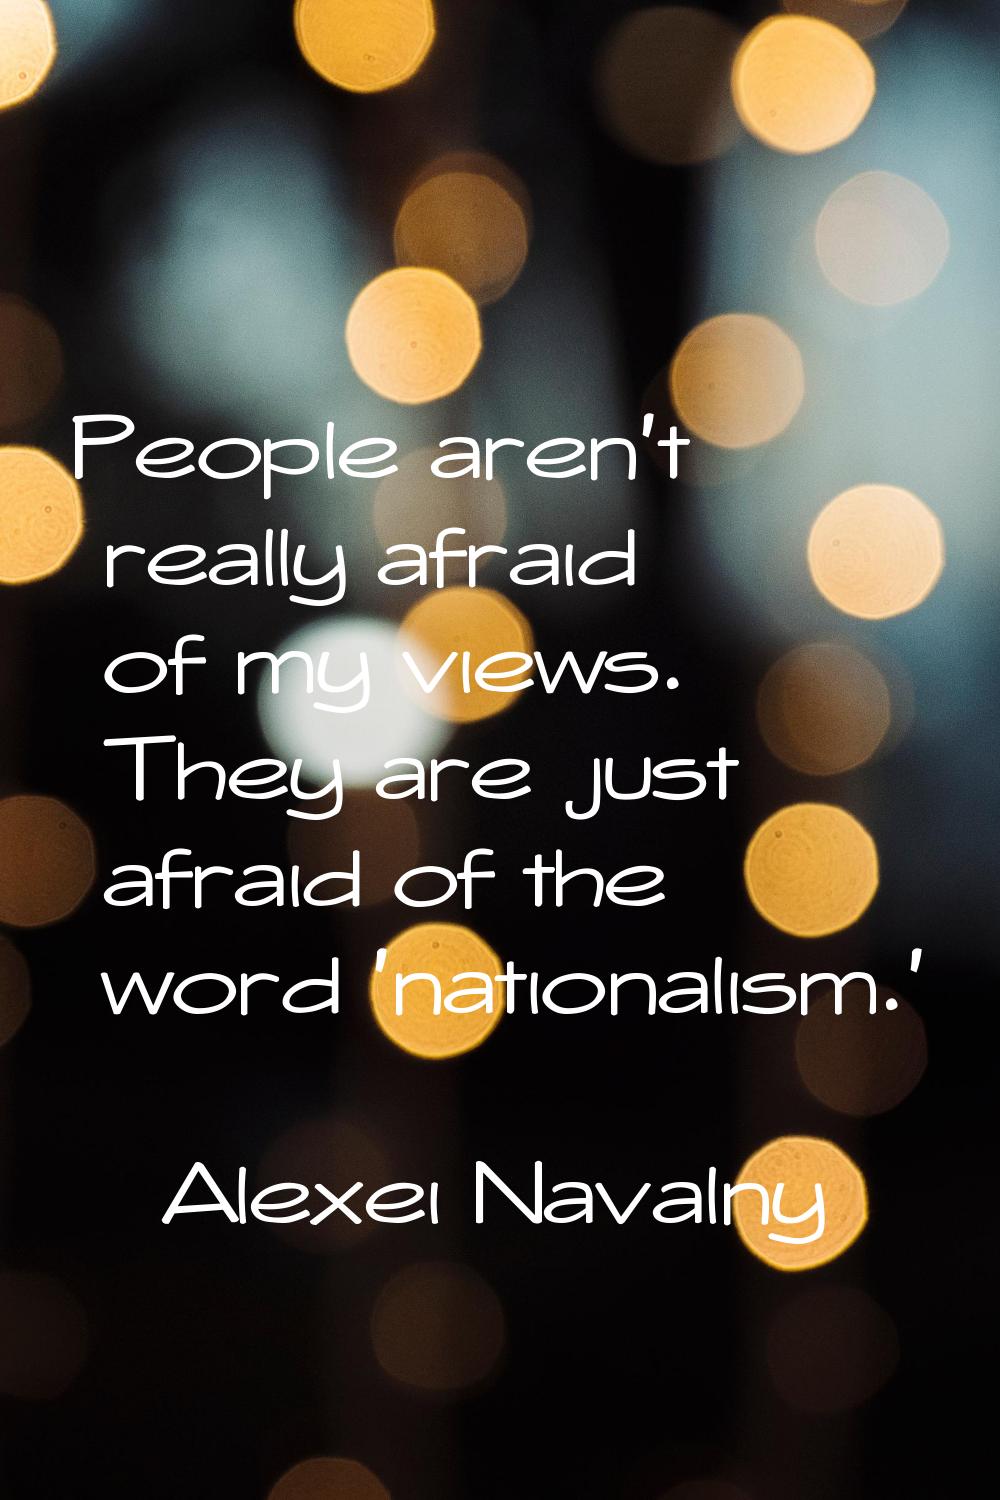 People aren't really afraid of my views. They are just afraid of the word 'nationalism.'